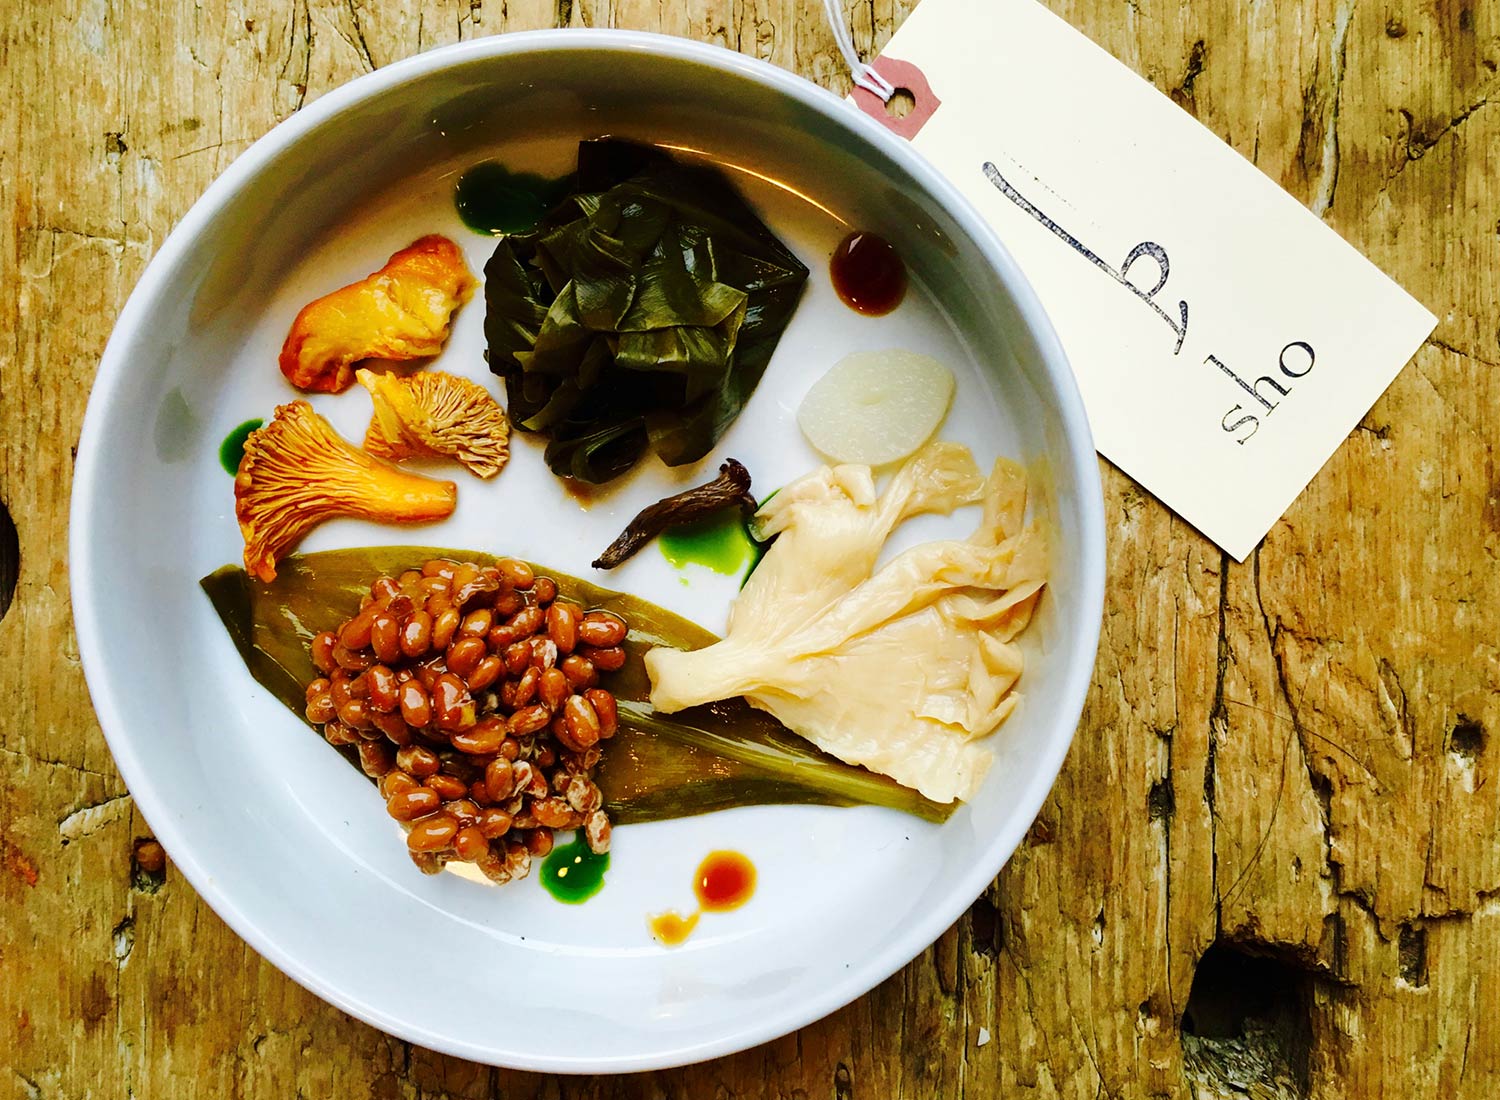 Food Lab at SHO: vegan gastronomy in a cold climate | fermented ramp leaves, oyster mushrooms, black trumpets, chanterelles with chive oil & vermont natto